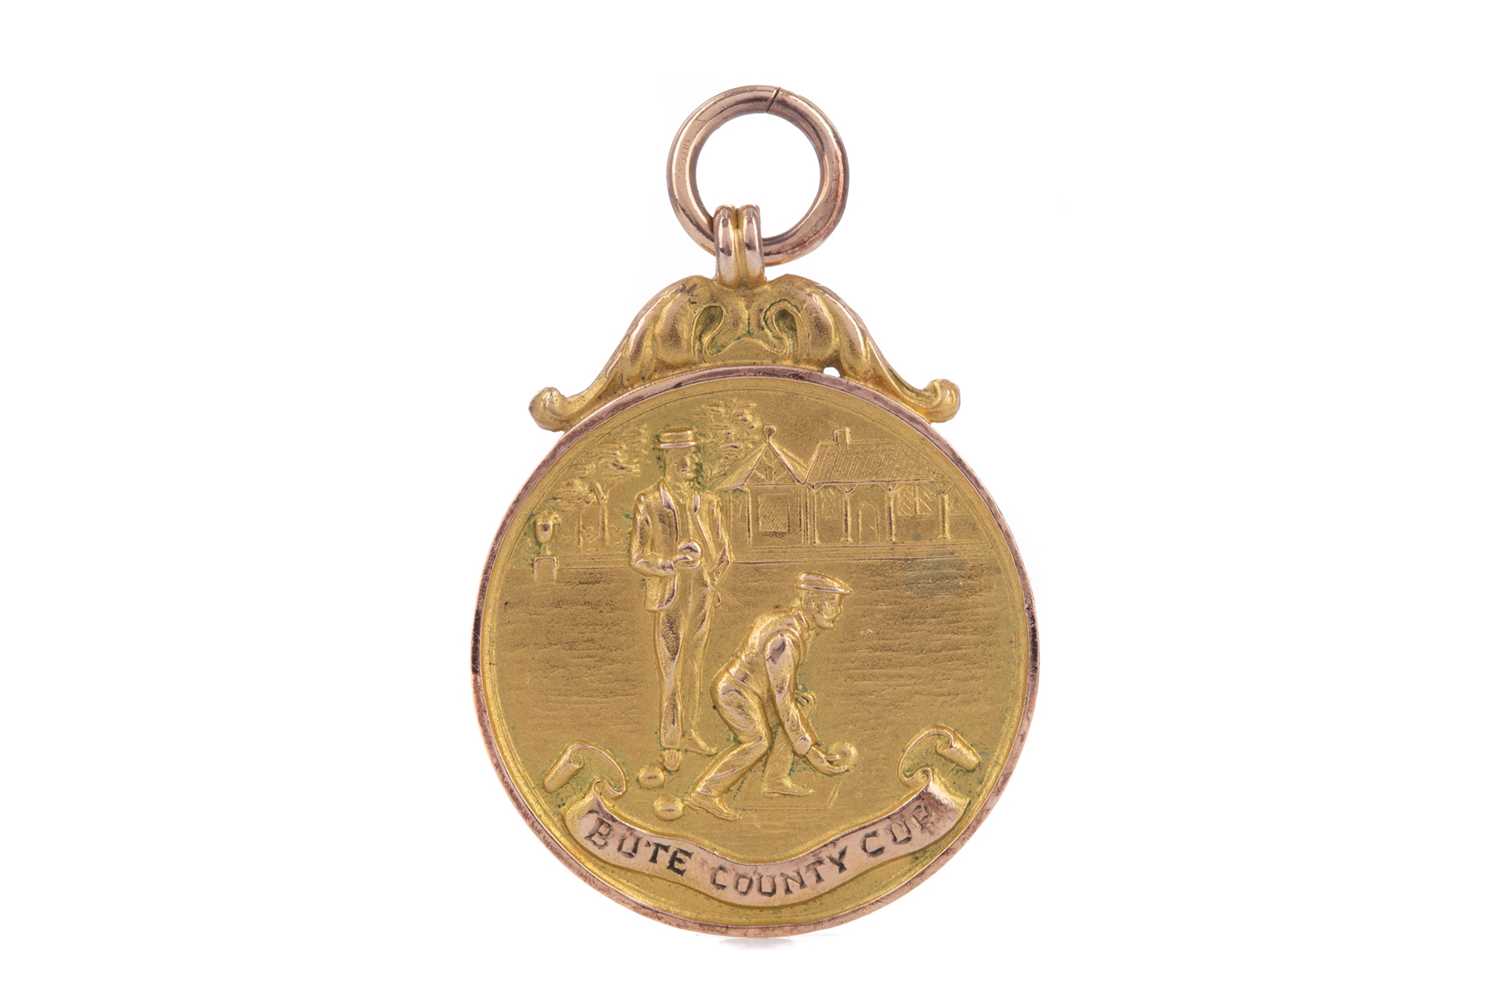 Lot 1705 - THE BUTE COUNTY CUP GOLD BOWLING MEDAL 1928